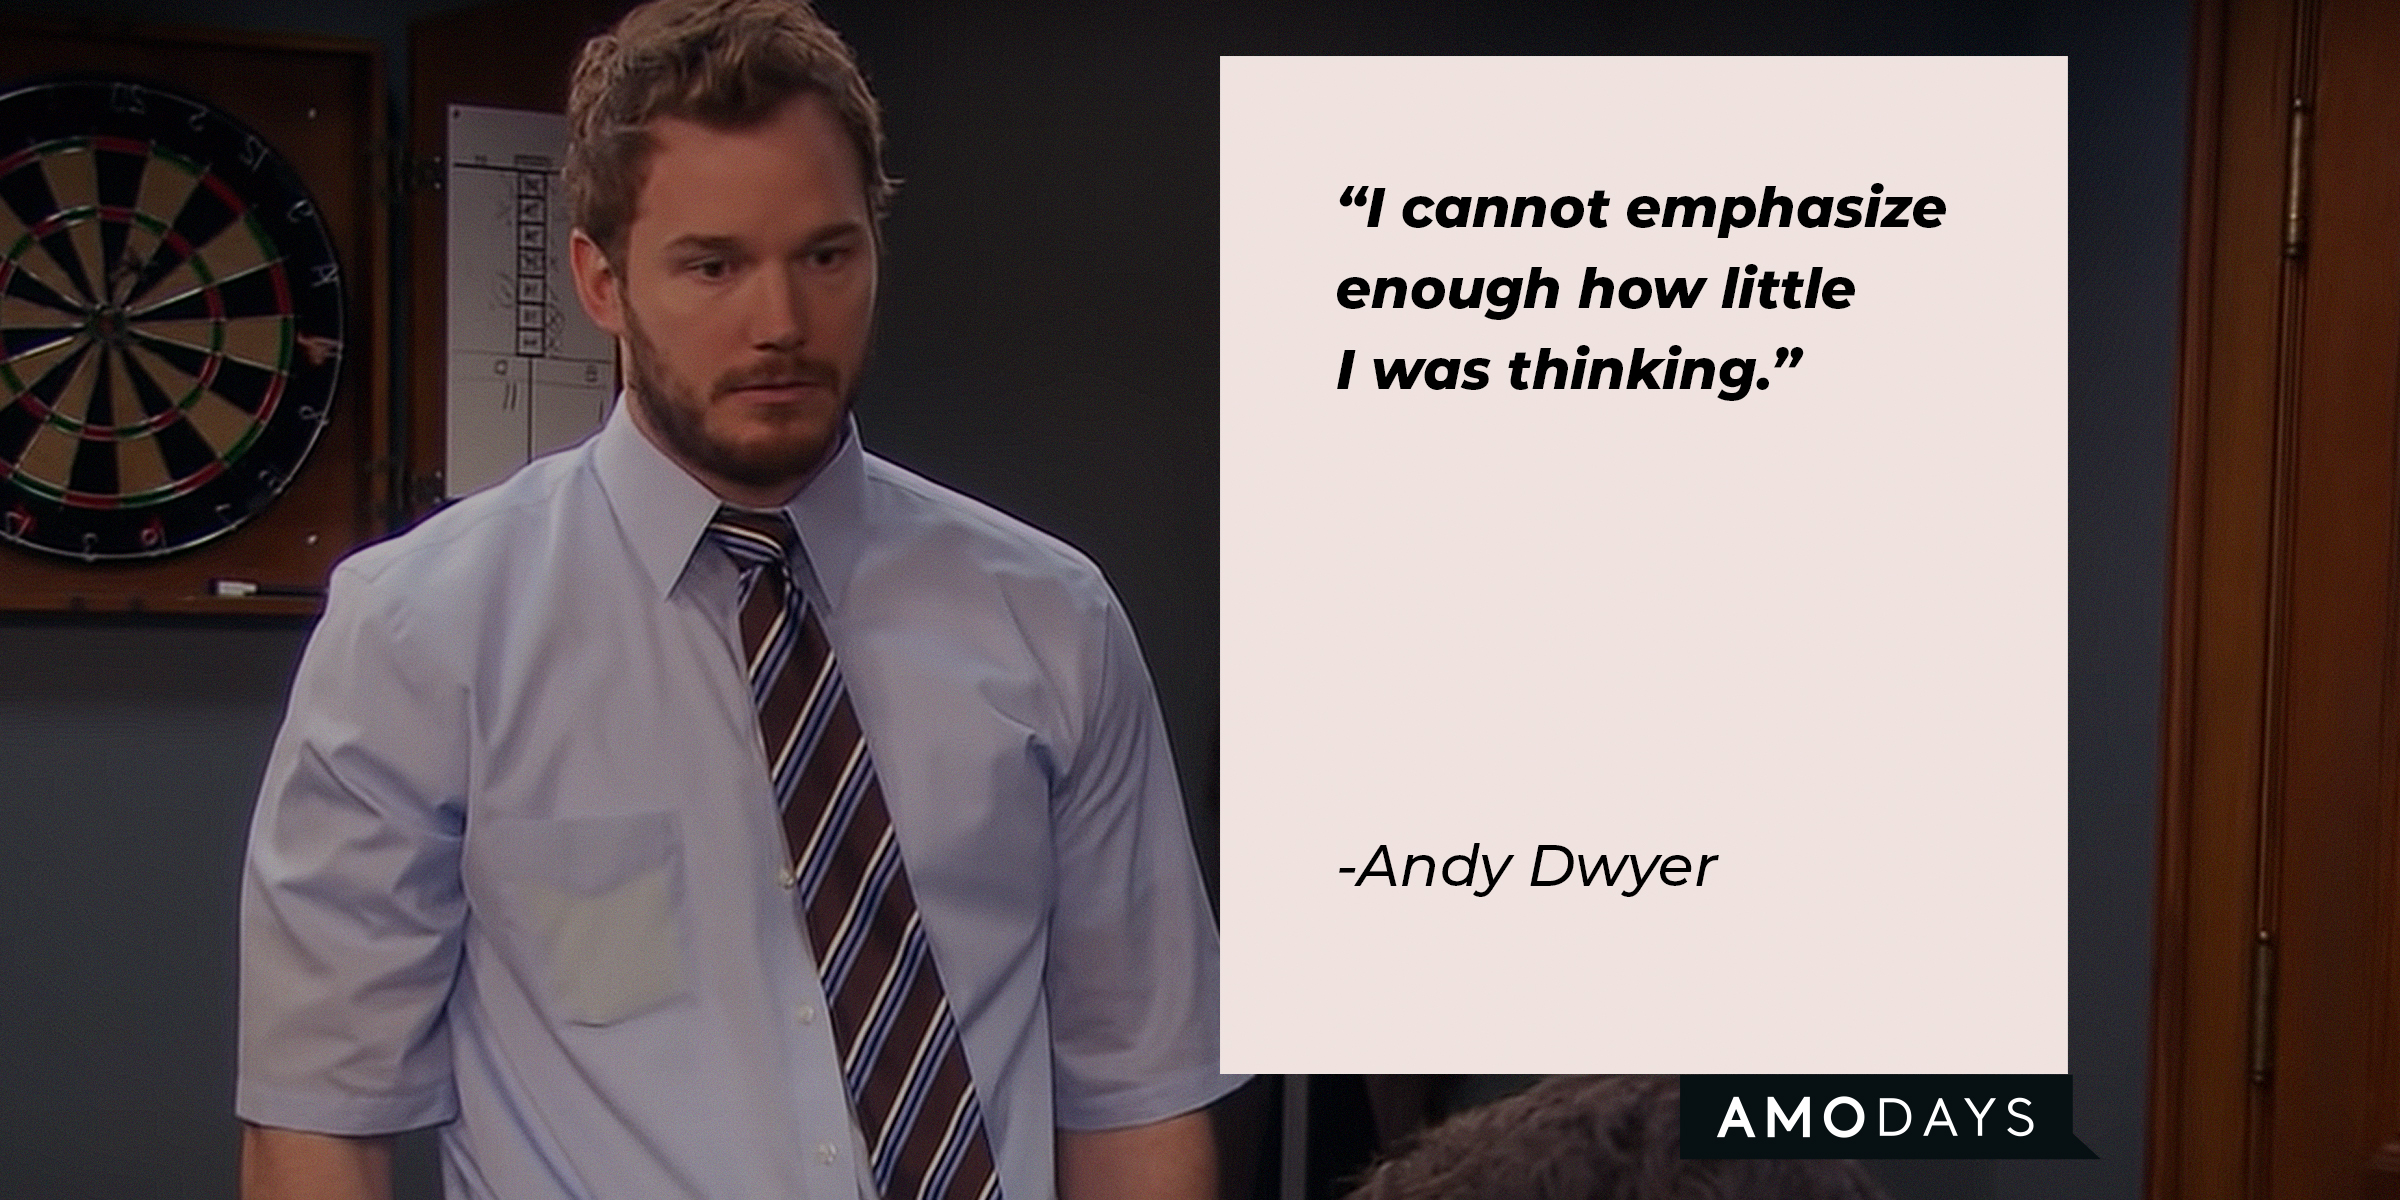 A picture of Andy Dwyer with his quote: “I cannot emphasize enough how little I was thinking." | Source: facebook.com/StarWars